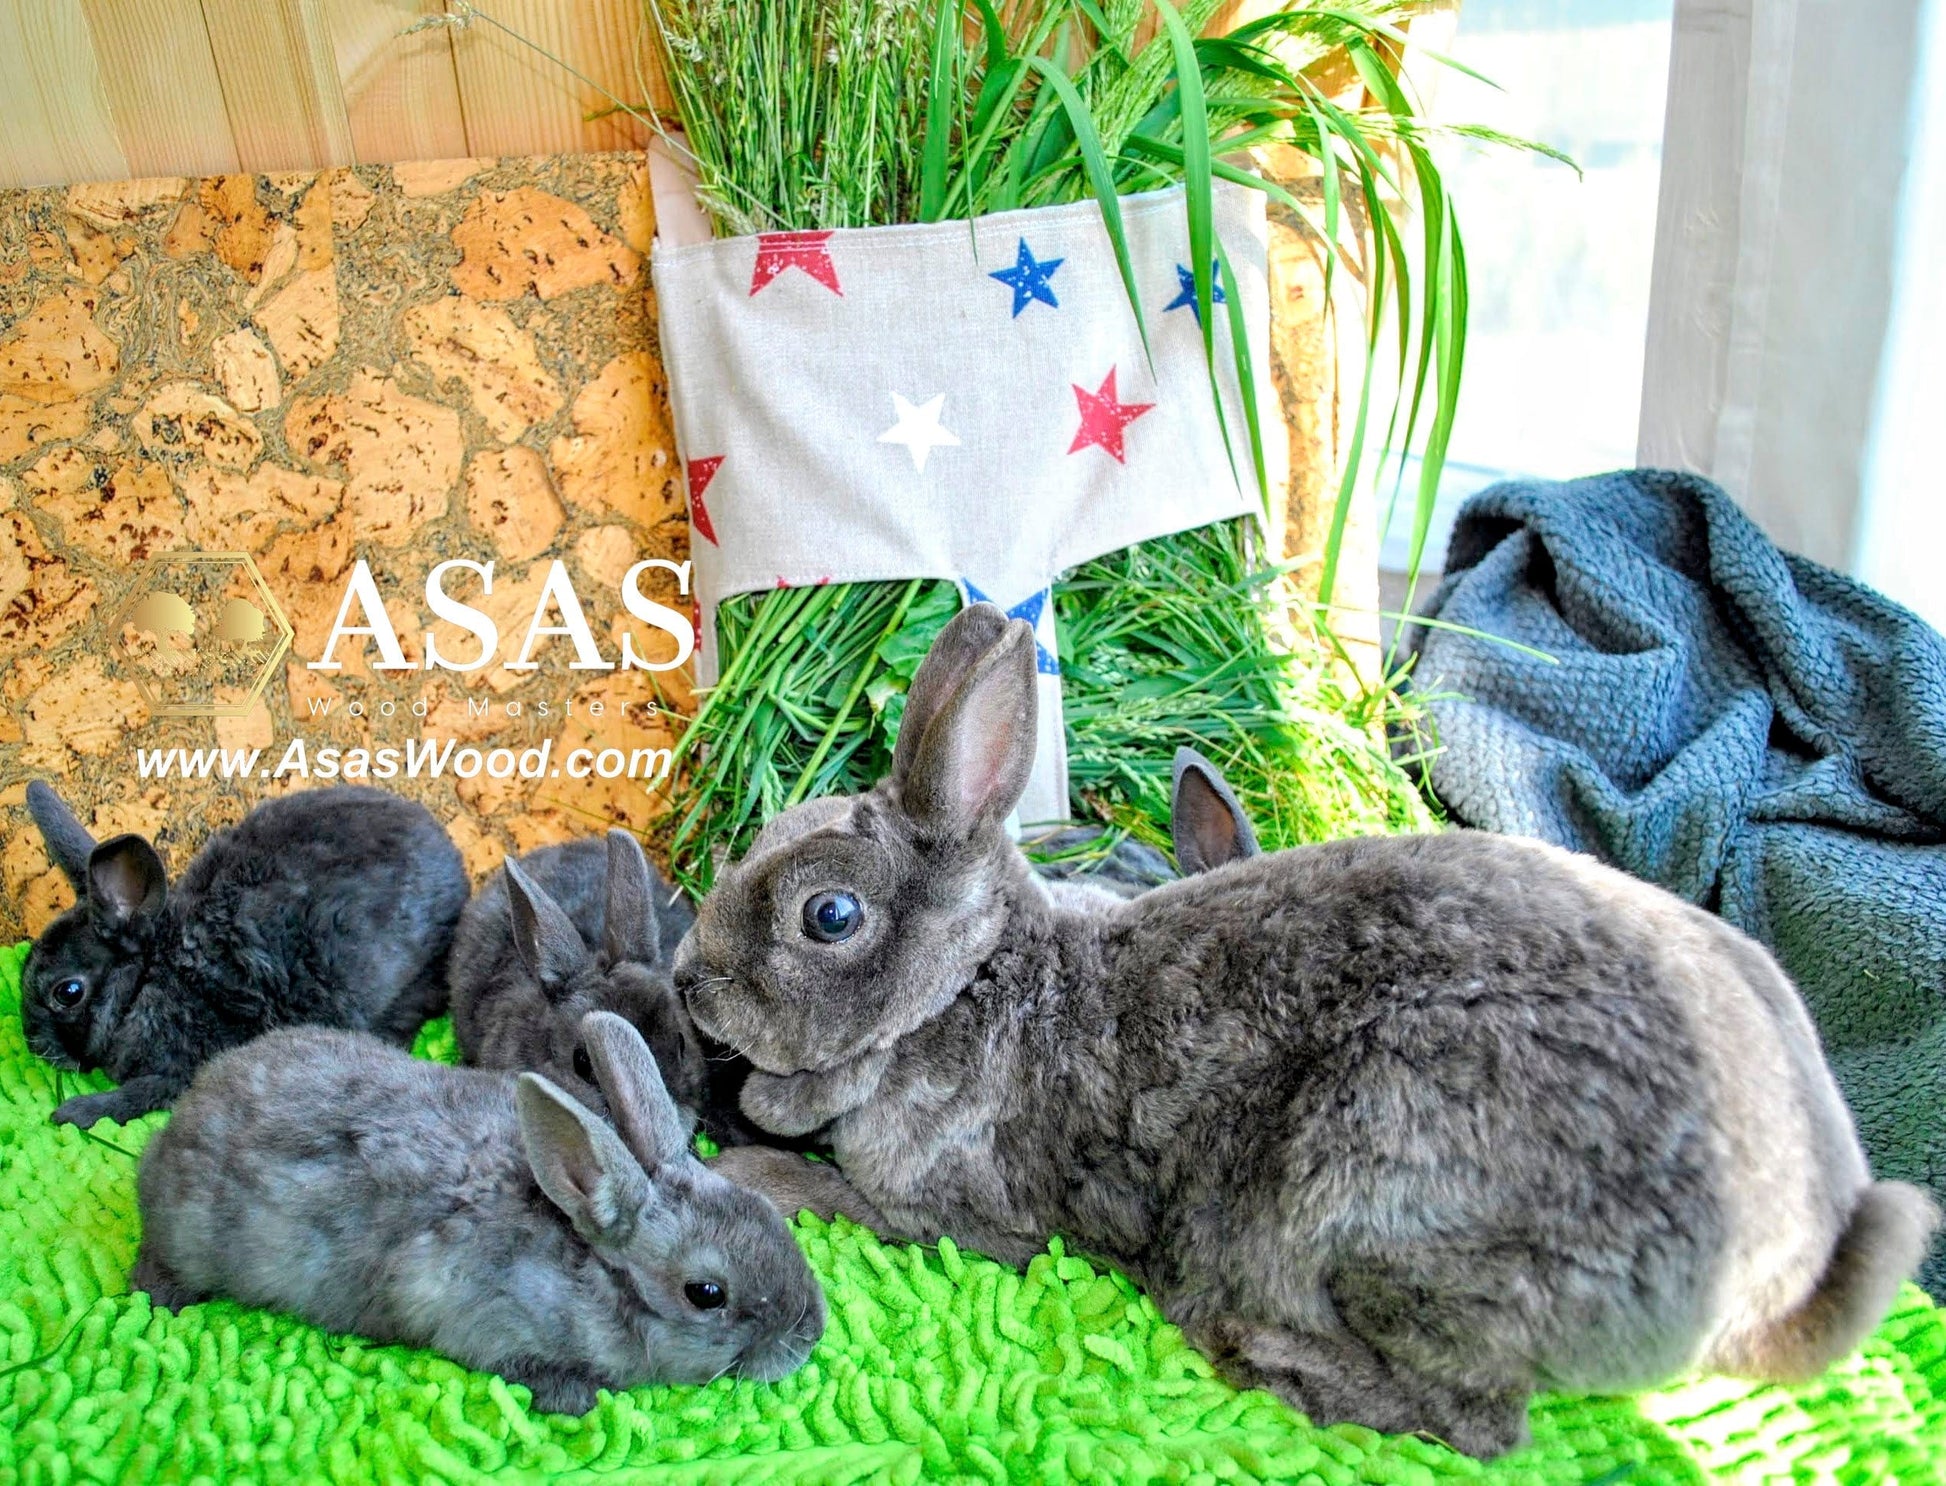 rabbit hay bag surrounded by rabbit family, made by asaswood